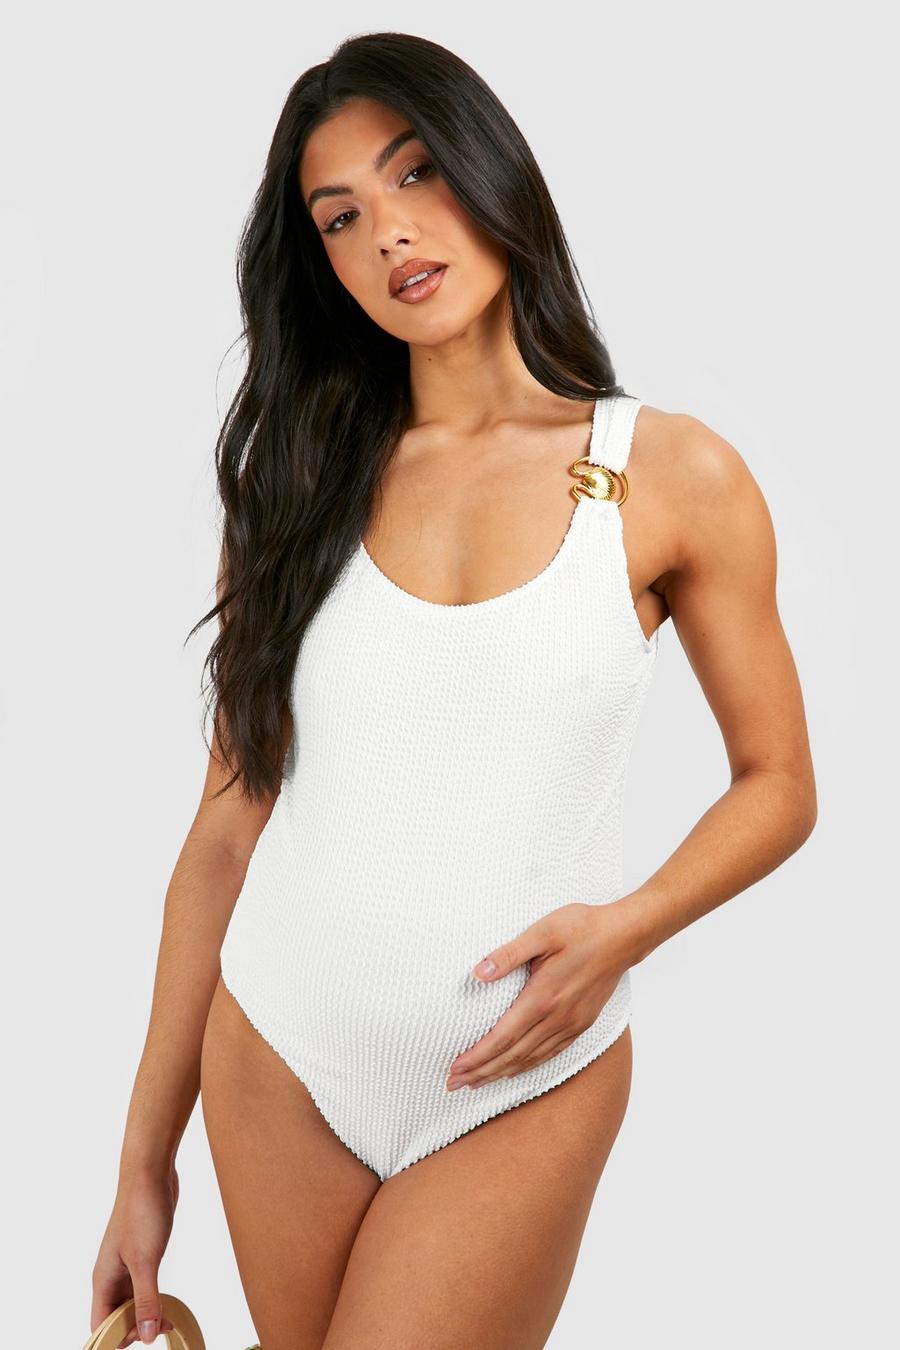 Women Maternity Swimsuit Two Piece Bikini Tie Ruched Front Crop